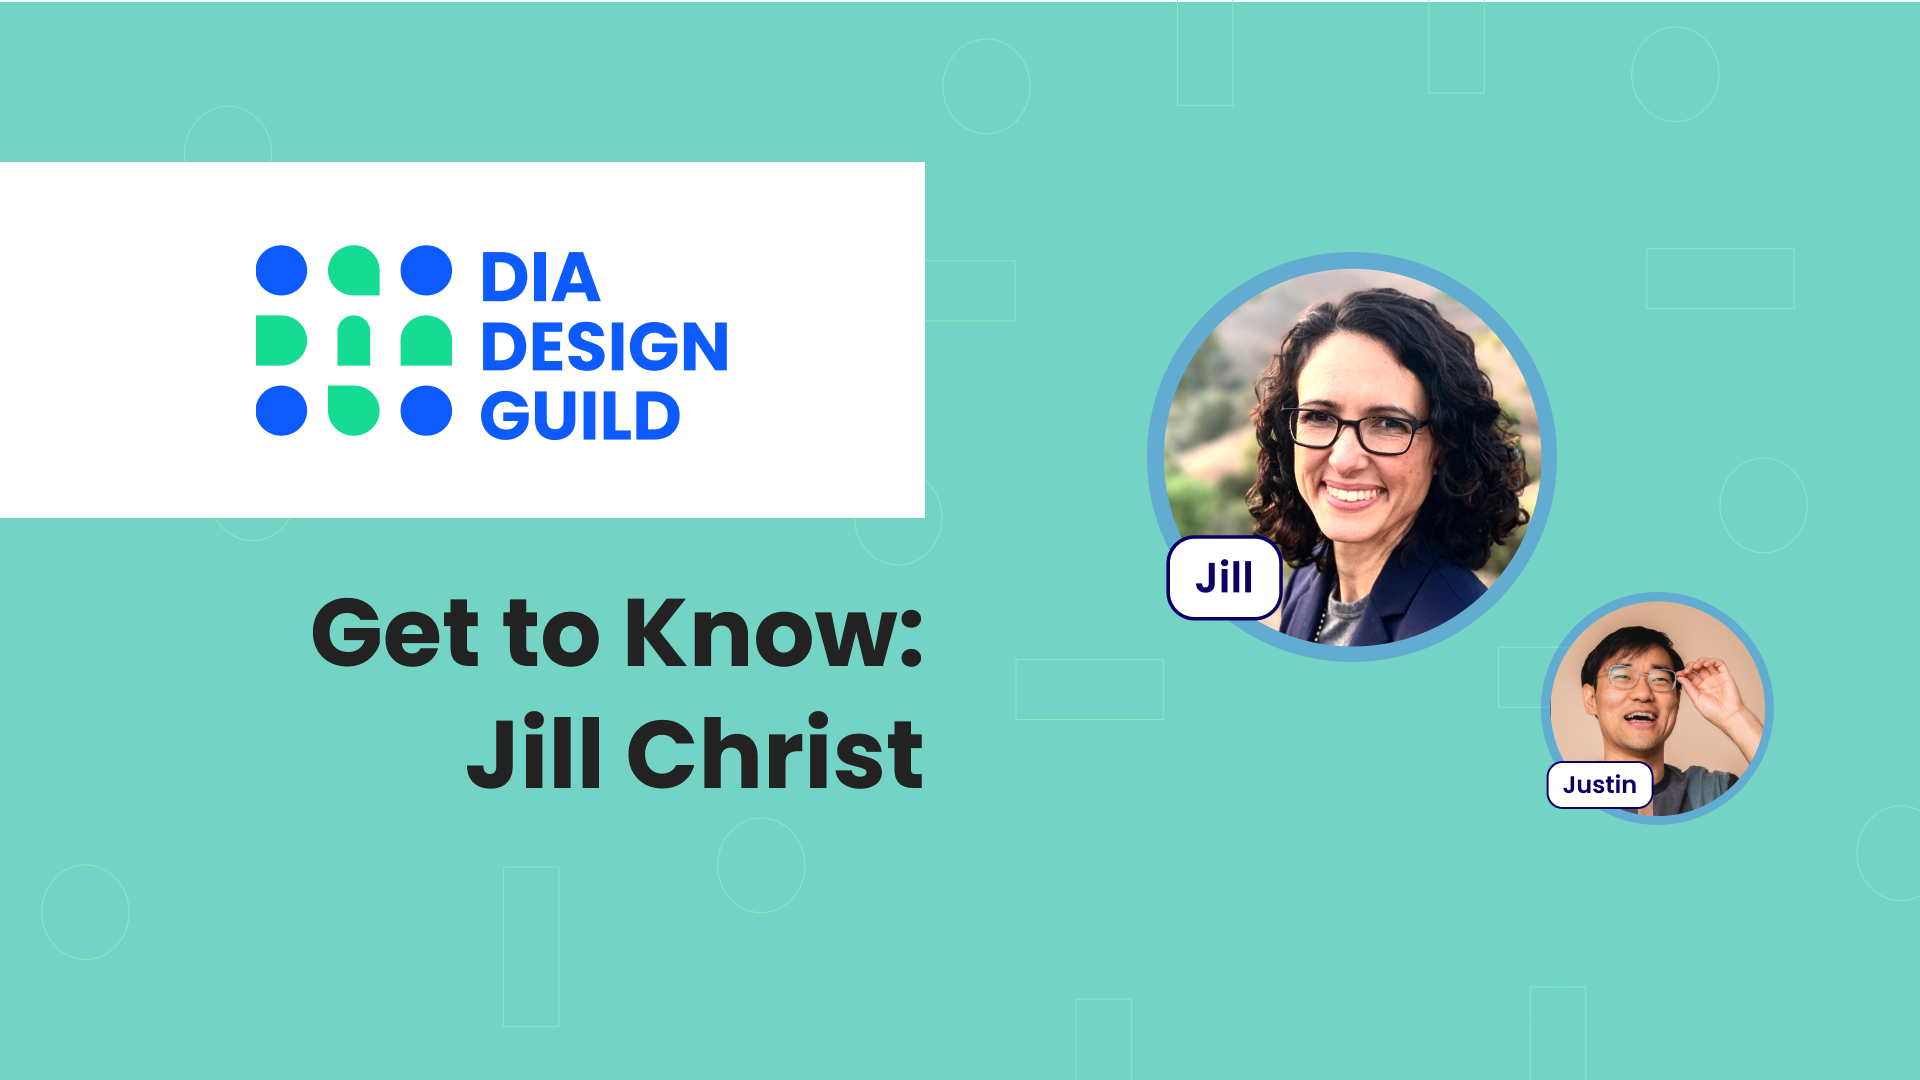 Get to Know: Jill Christ